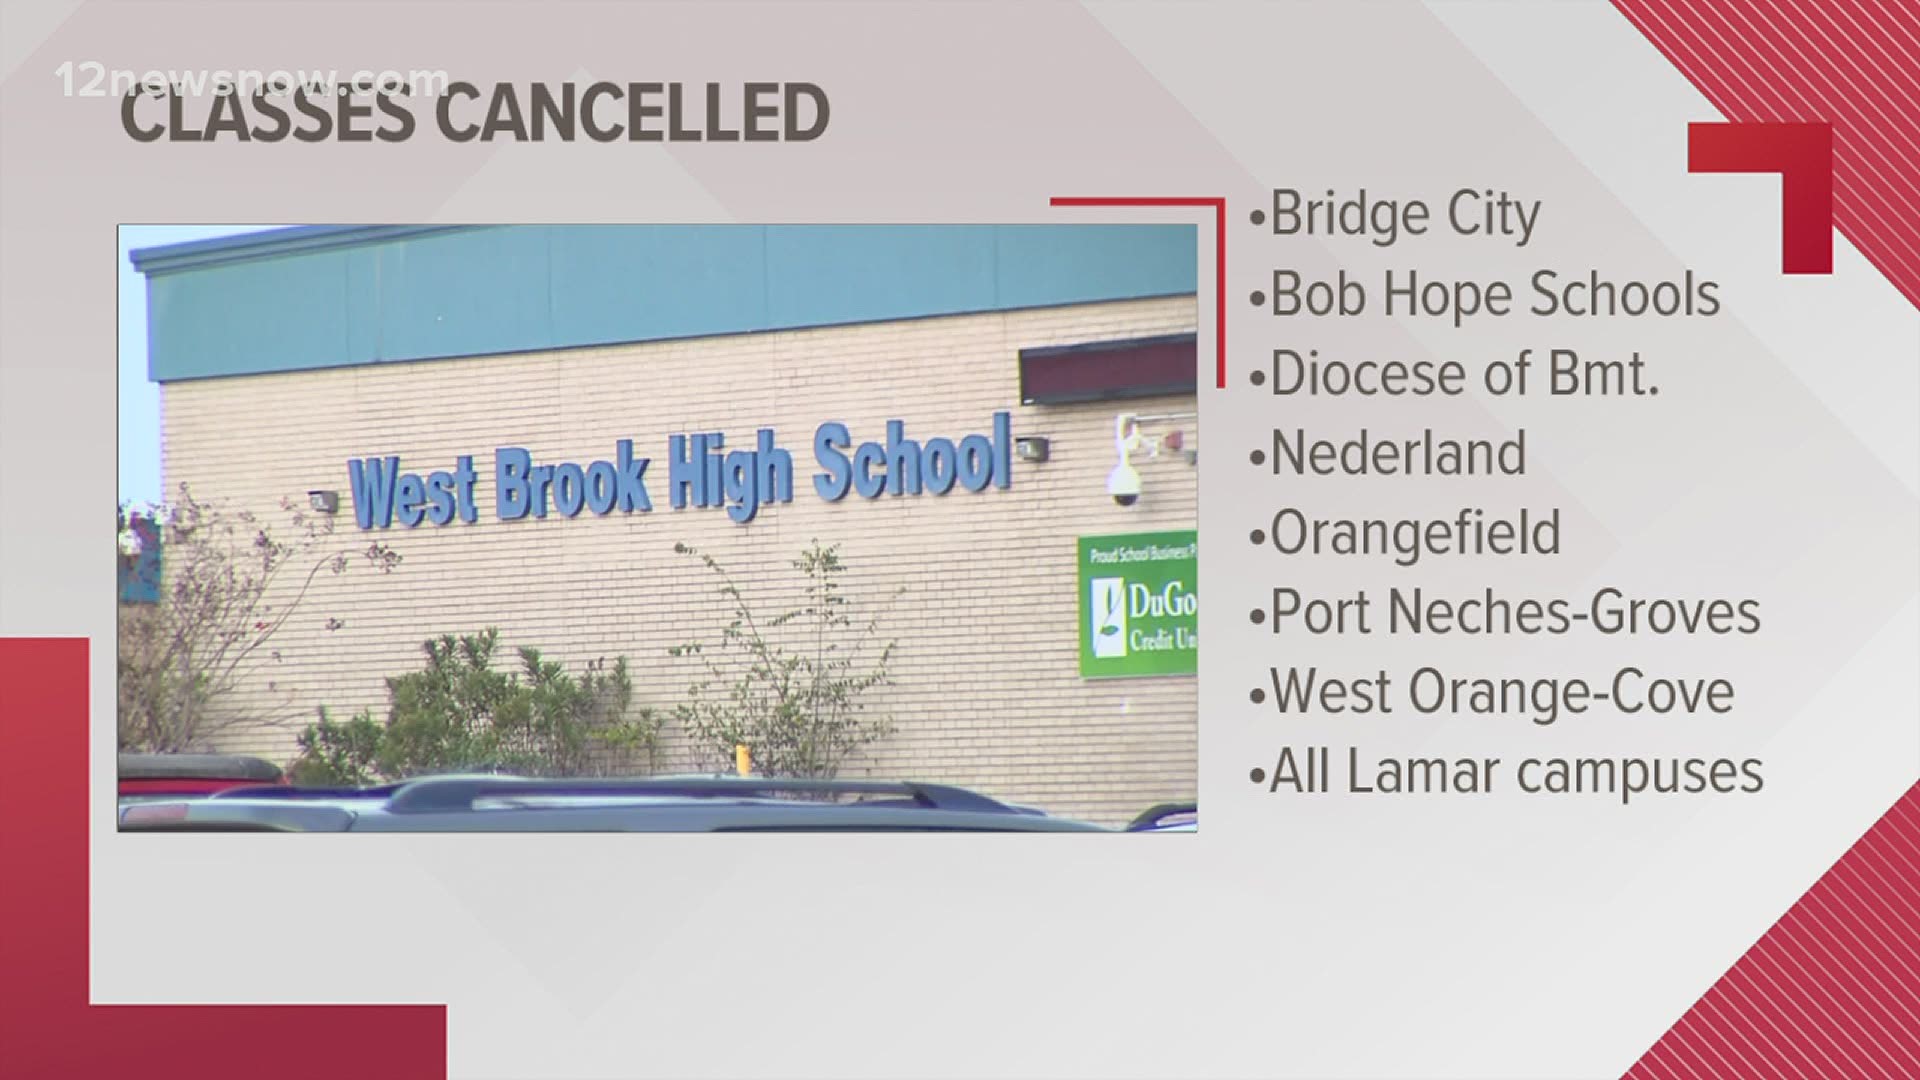 All Lamar campuses, Nederland, Bridge City and others will be closed